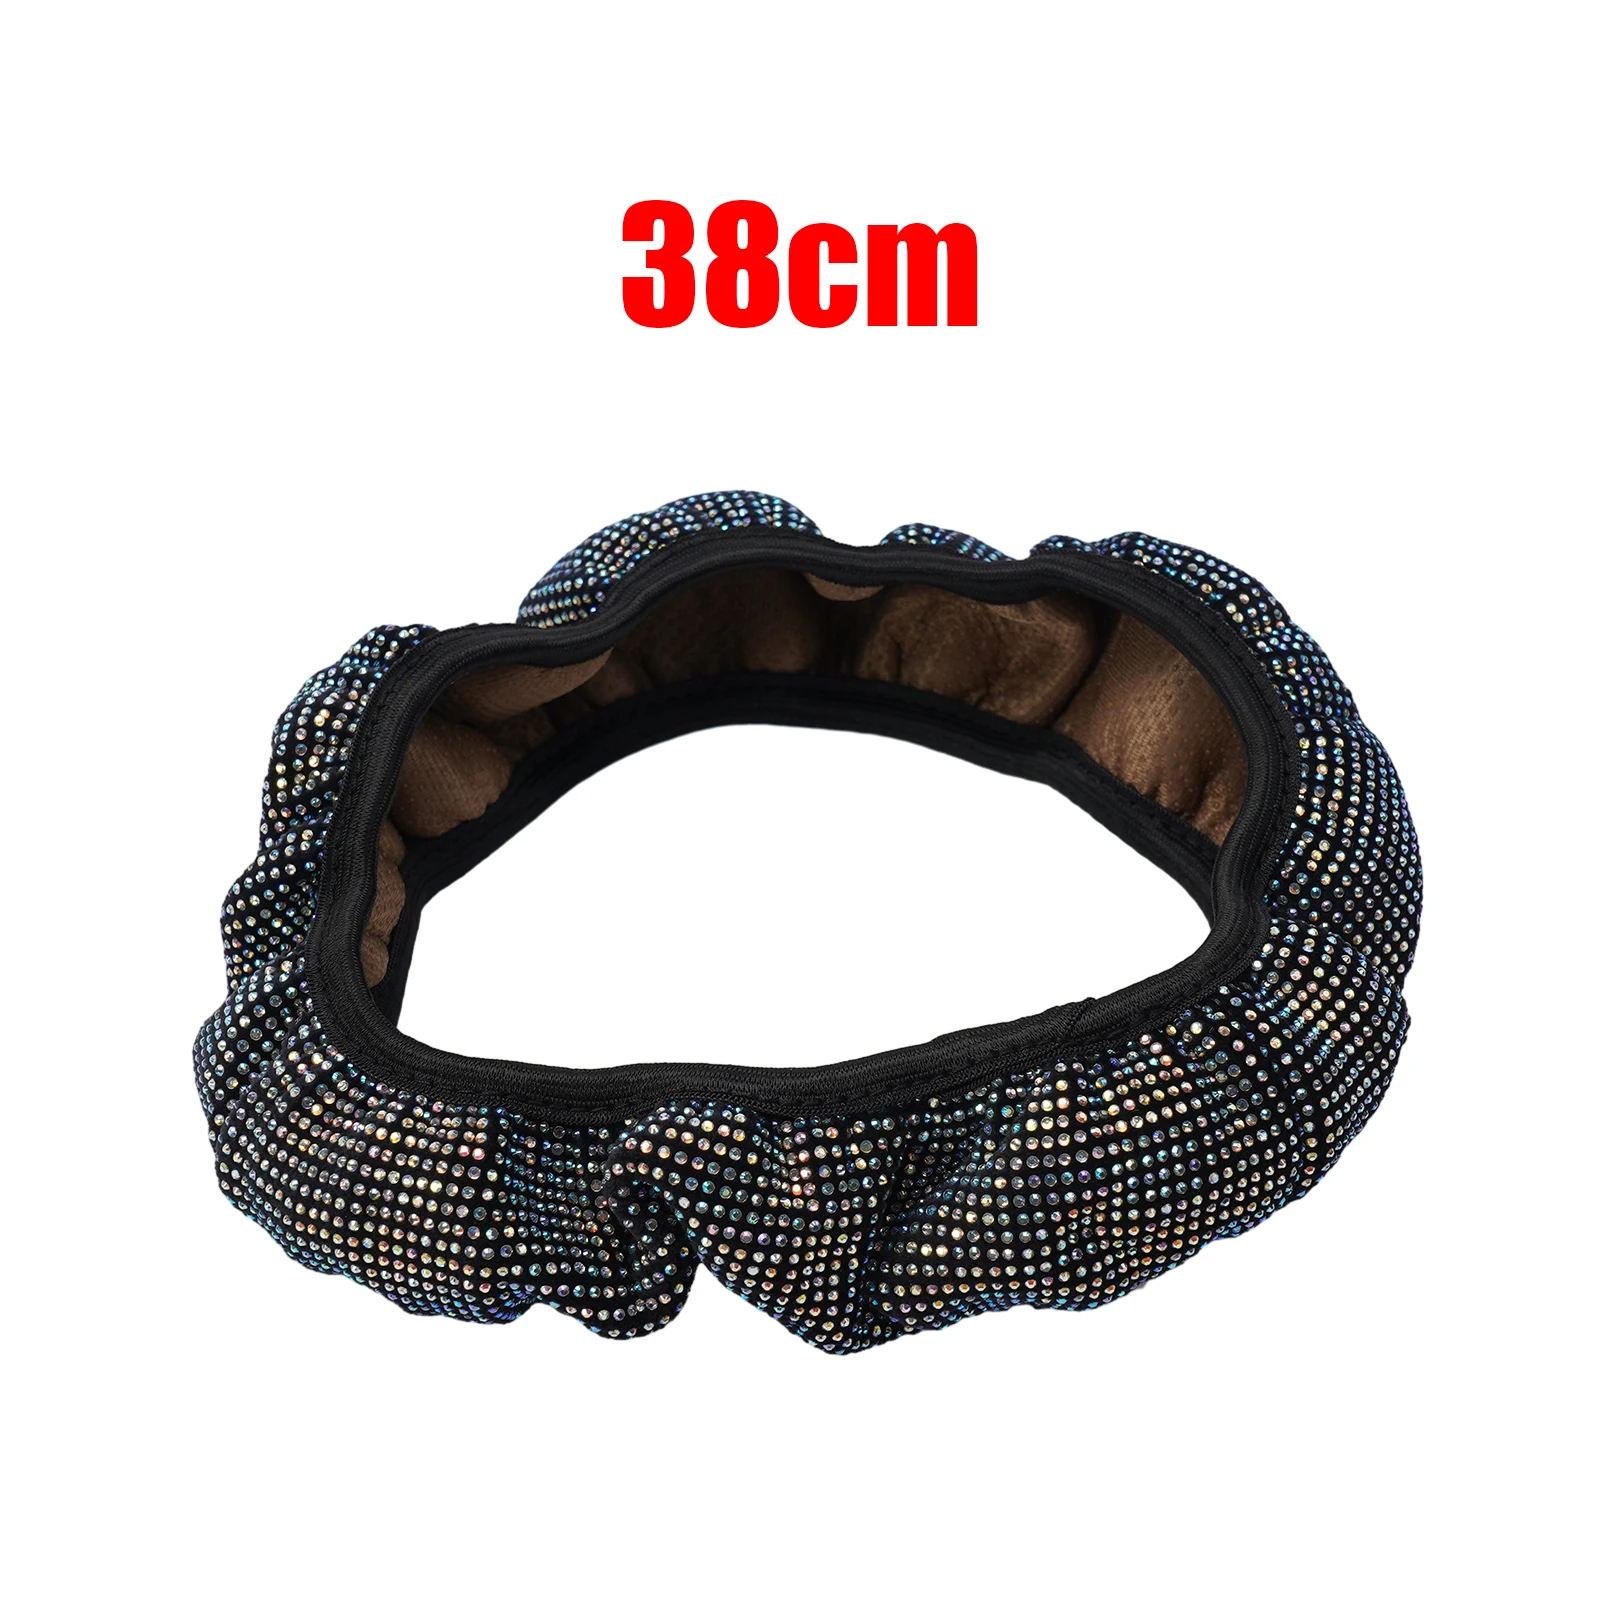 

Accessories Car Steering Wheel Cover Bling Colorful Crystal Fit 37 38cm Car SUV Rhinestone Trim High Quality New